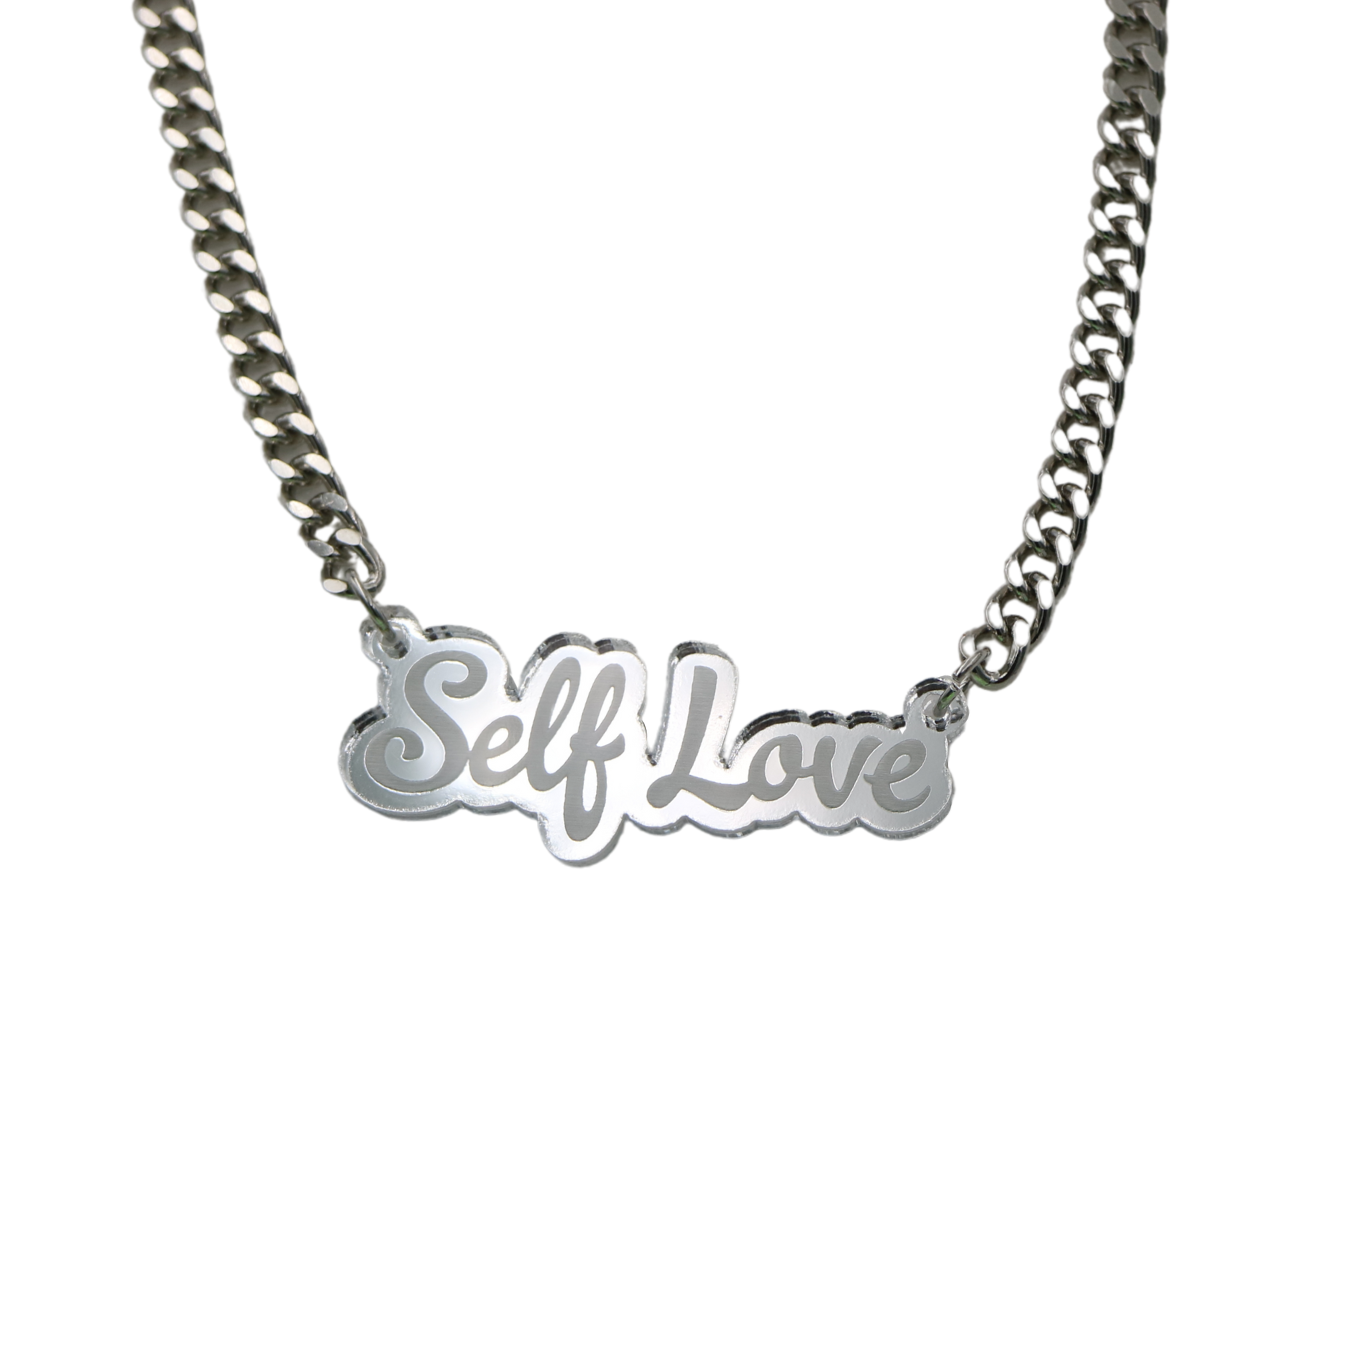 Haus of Dizzy 'Ghetto Gold' Necklaces